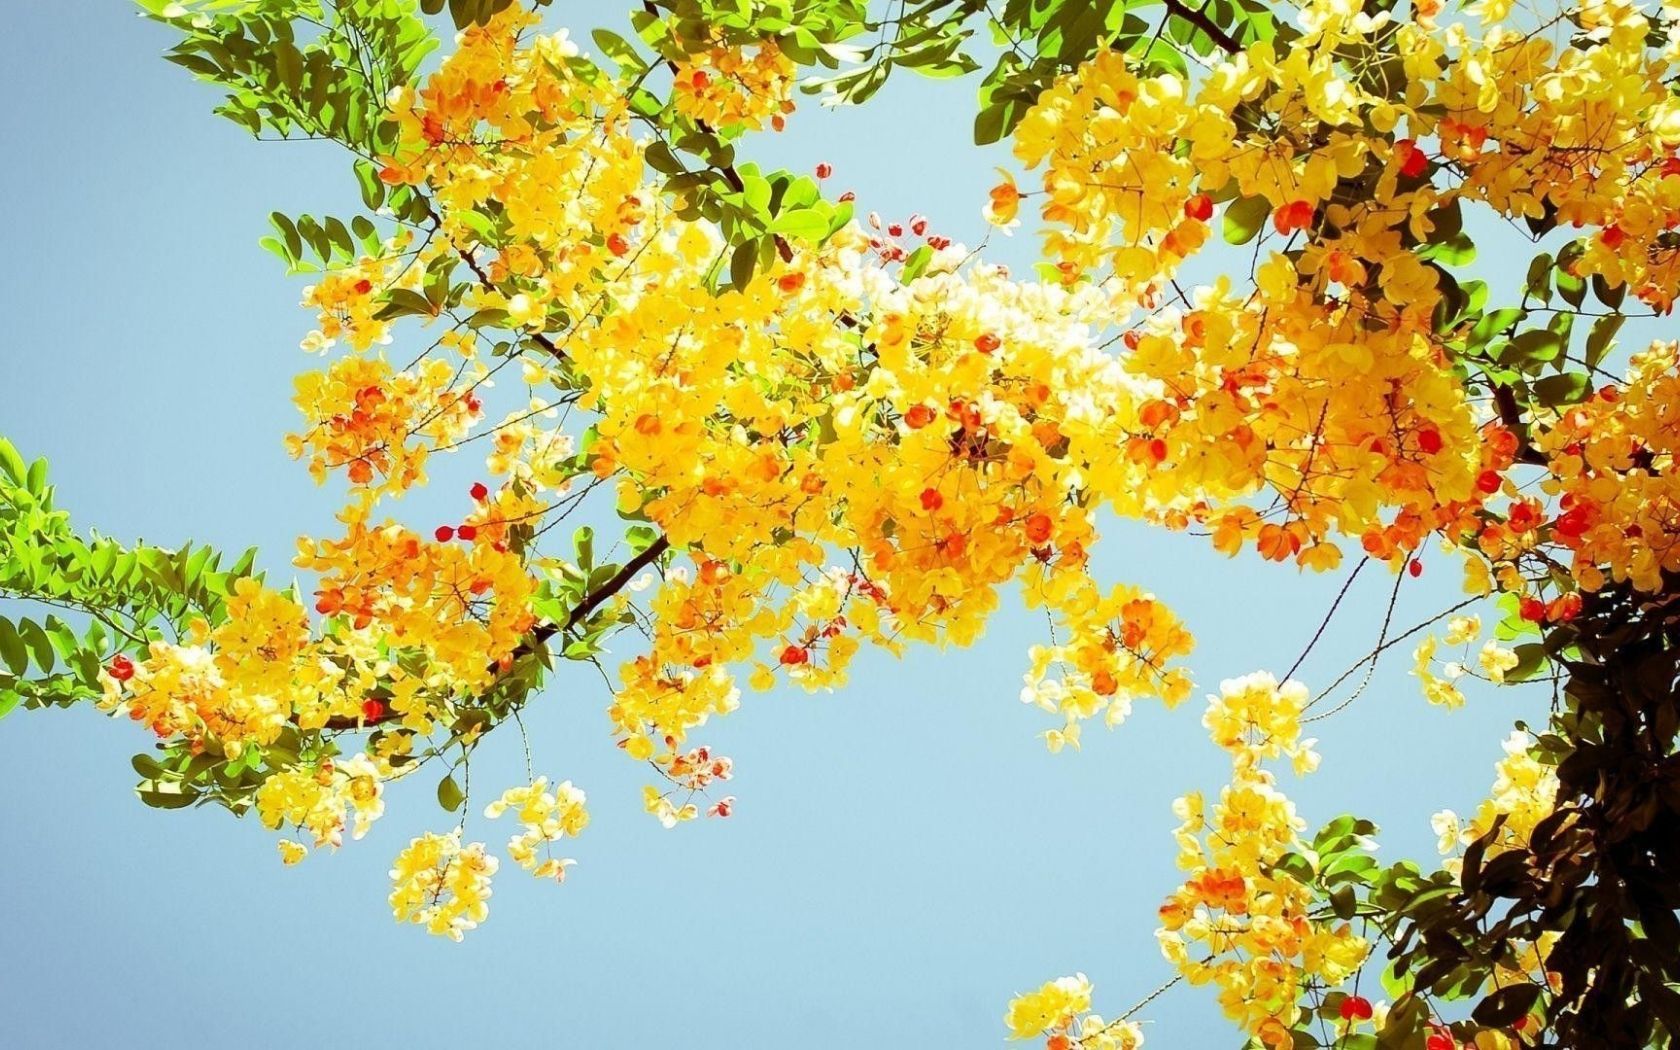 A tree with yellow flowers against a blue sky. - Spring